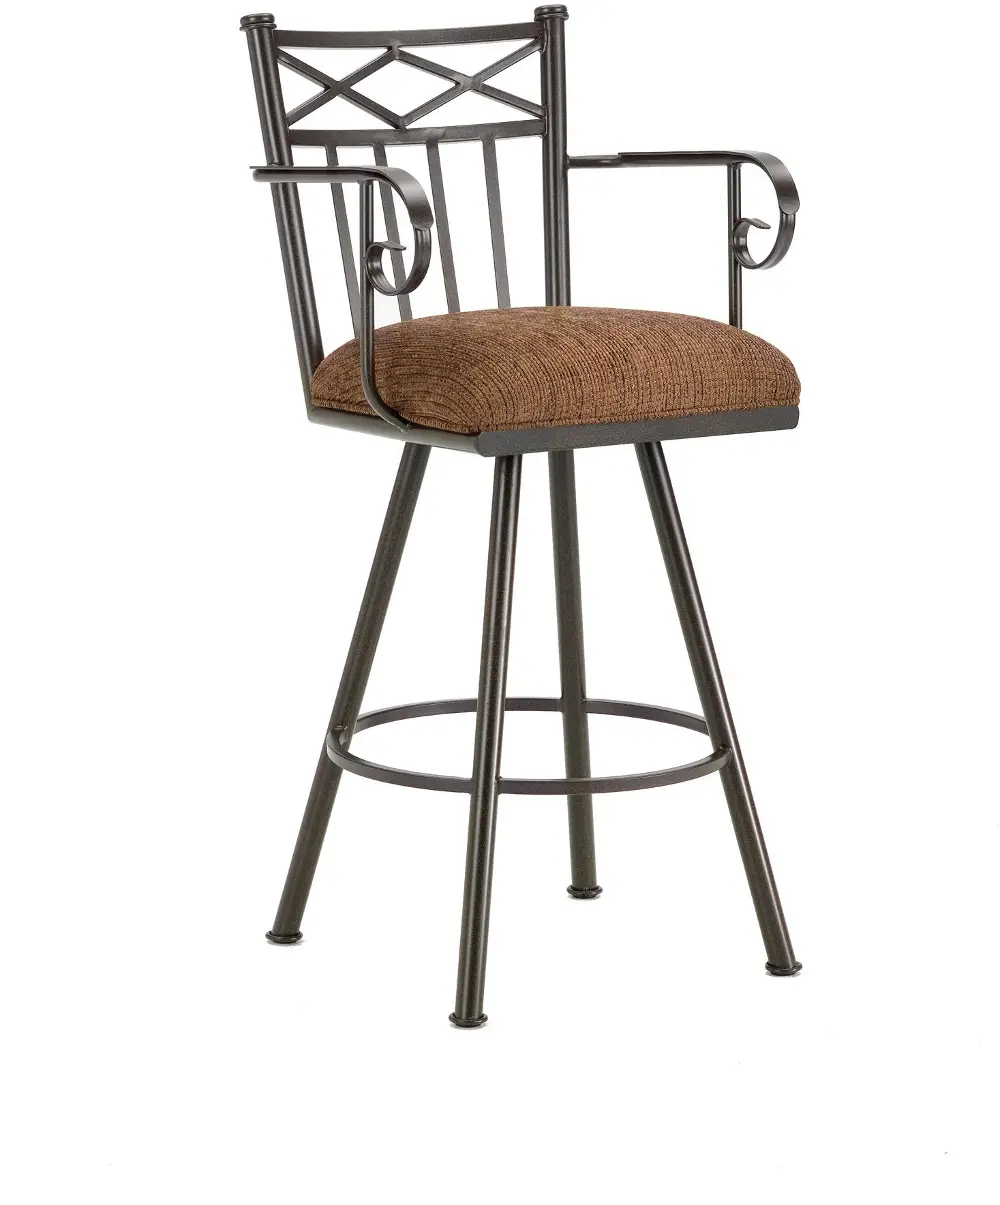 Rust Metal Swivel Counter Height Stool with Arms - Alexander-1